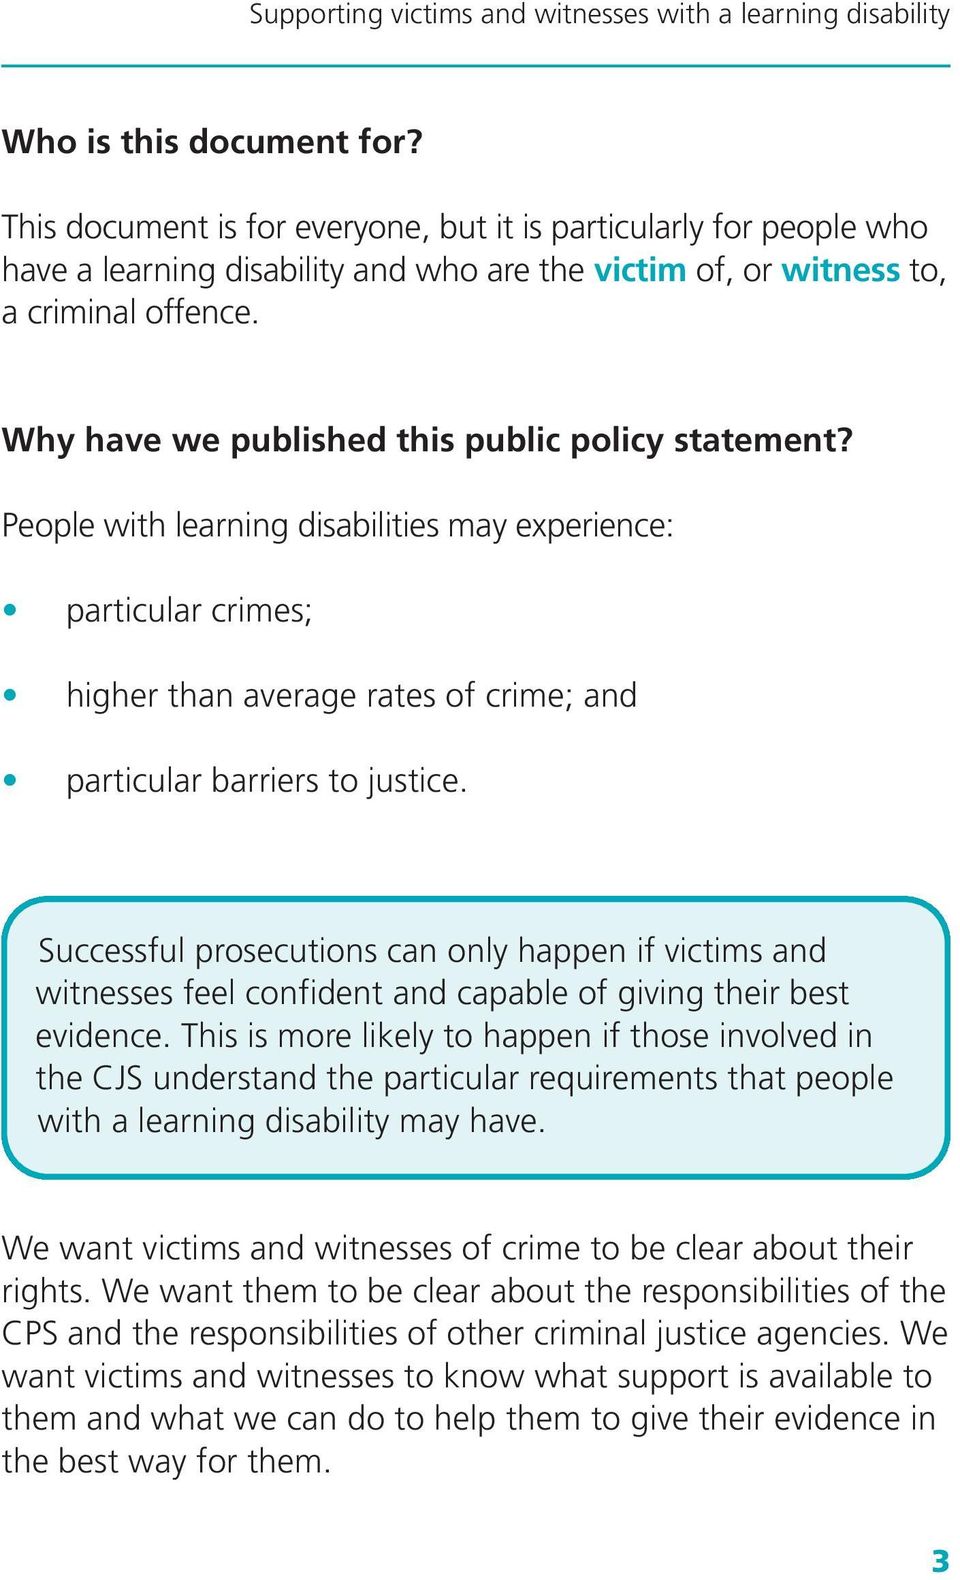 Successful prosecutions can only happen if victims and witnesses feel confident and capable of giving their best evidence.